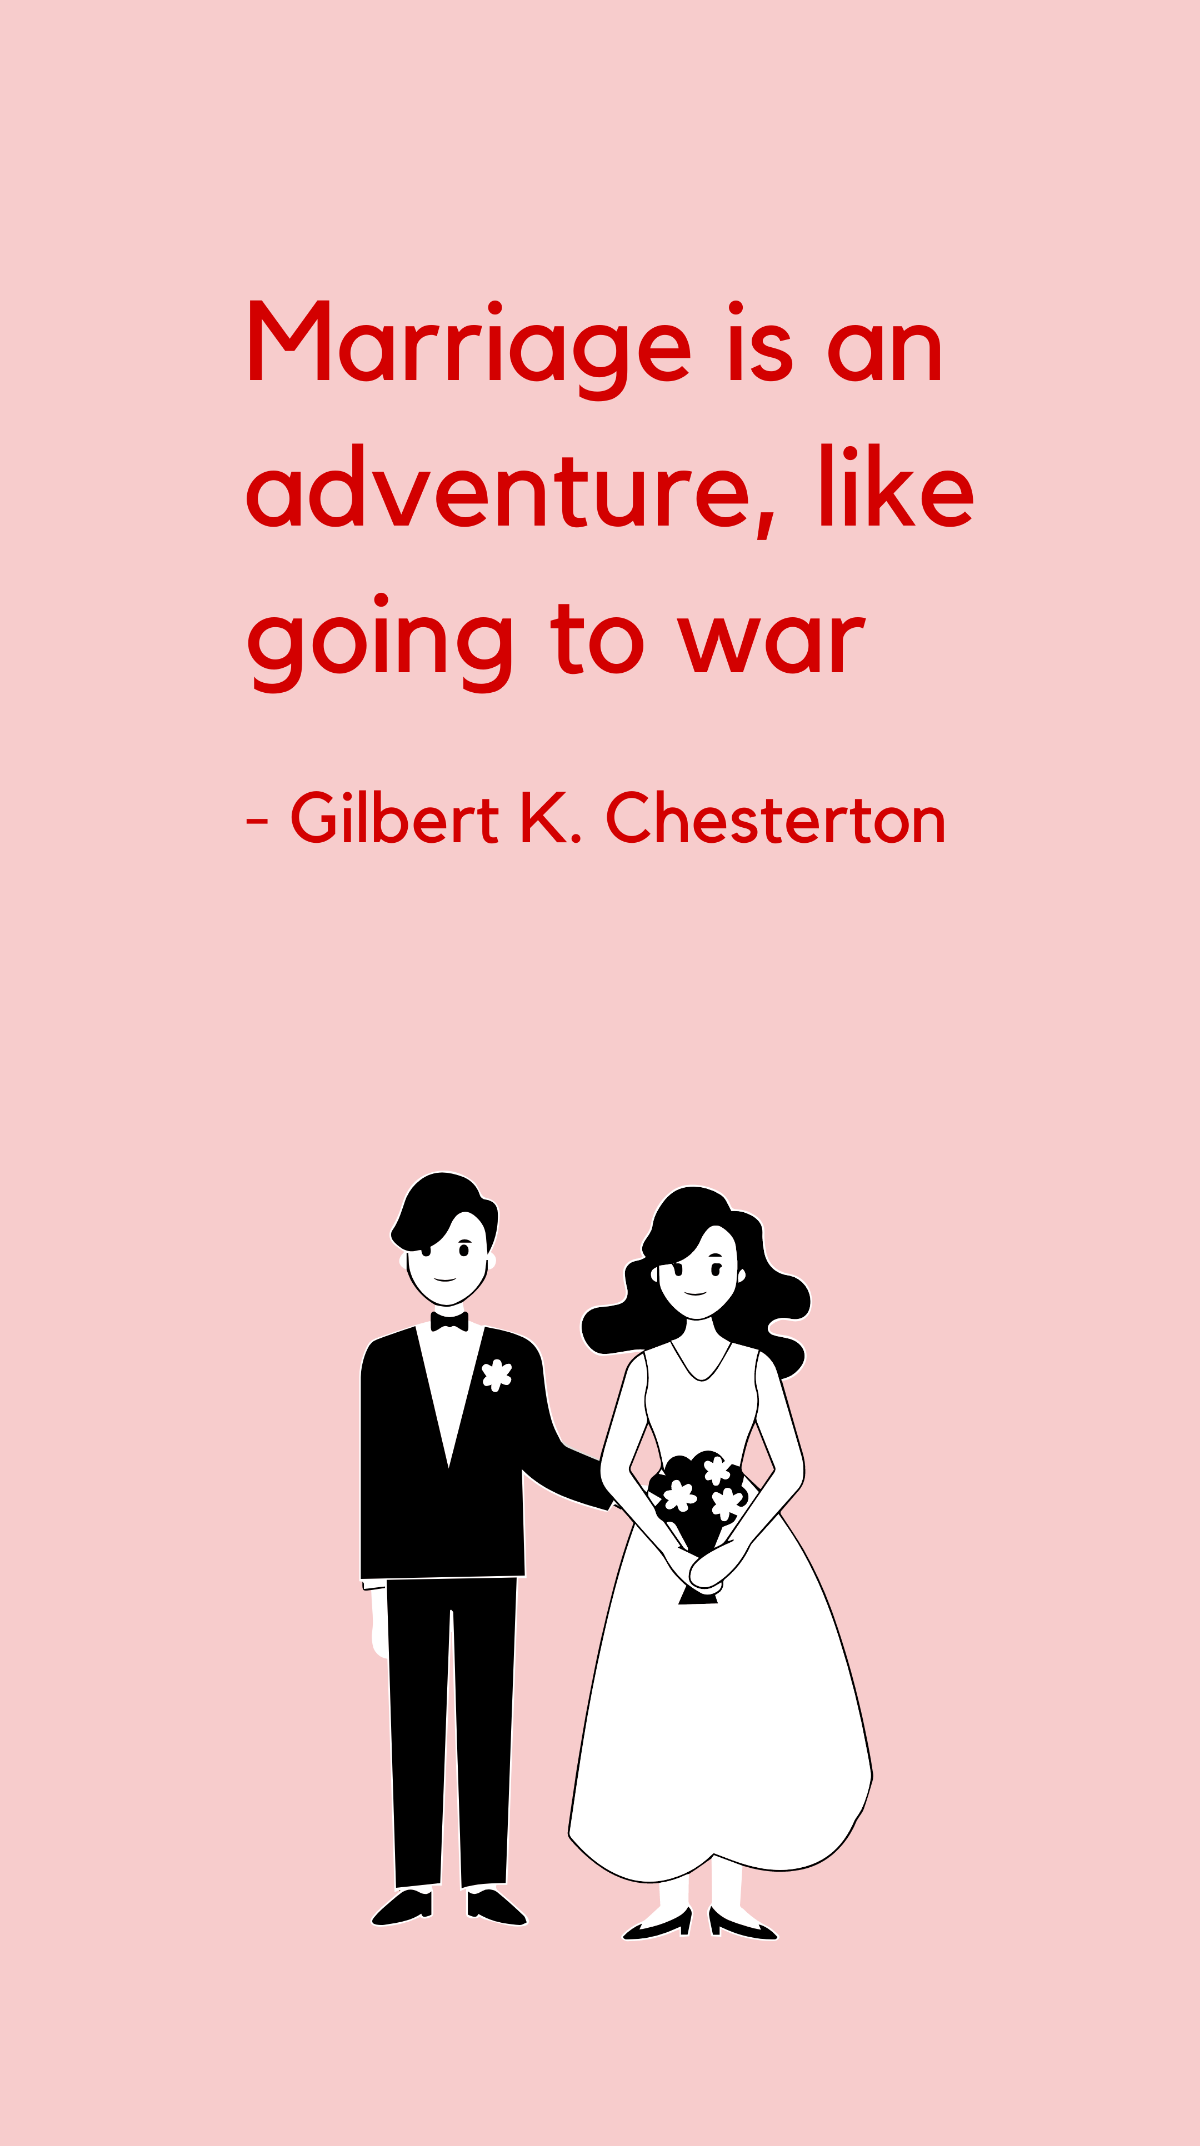 Gilbert K. Chesterton - Marriage is an adventure, like going to war